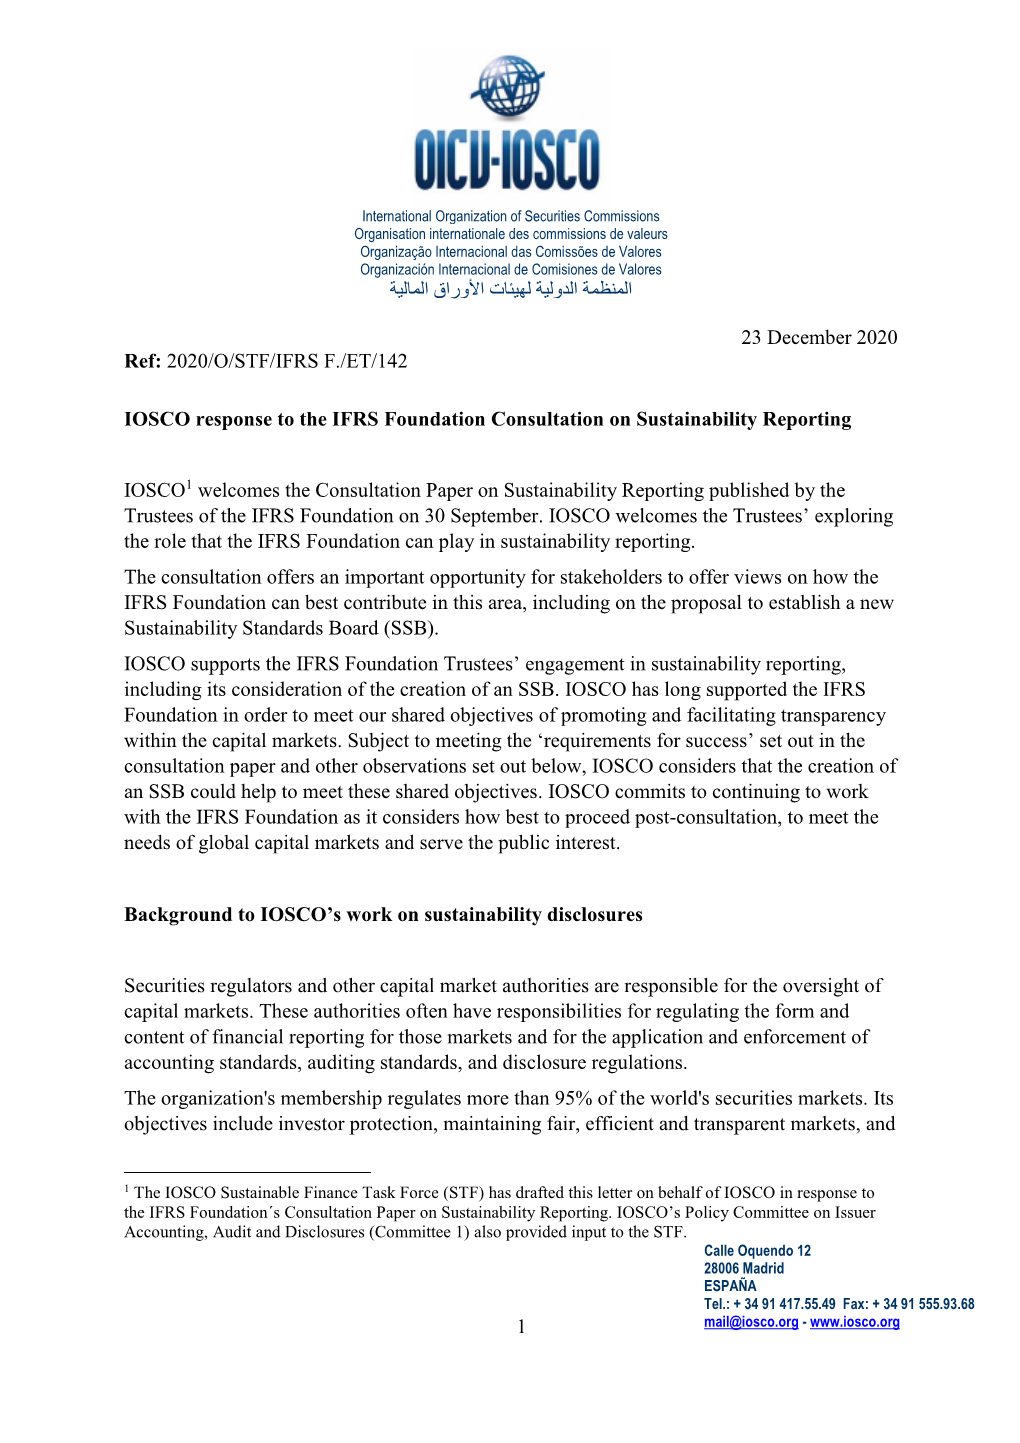 IOSCO Response to the IFRS Foundation Consultation on Sustainability Reporting